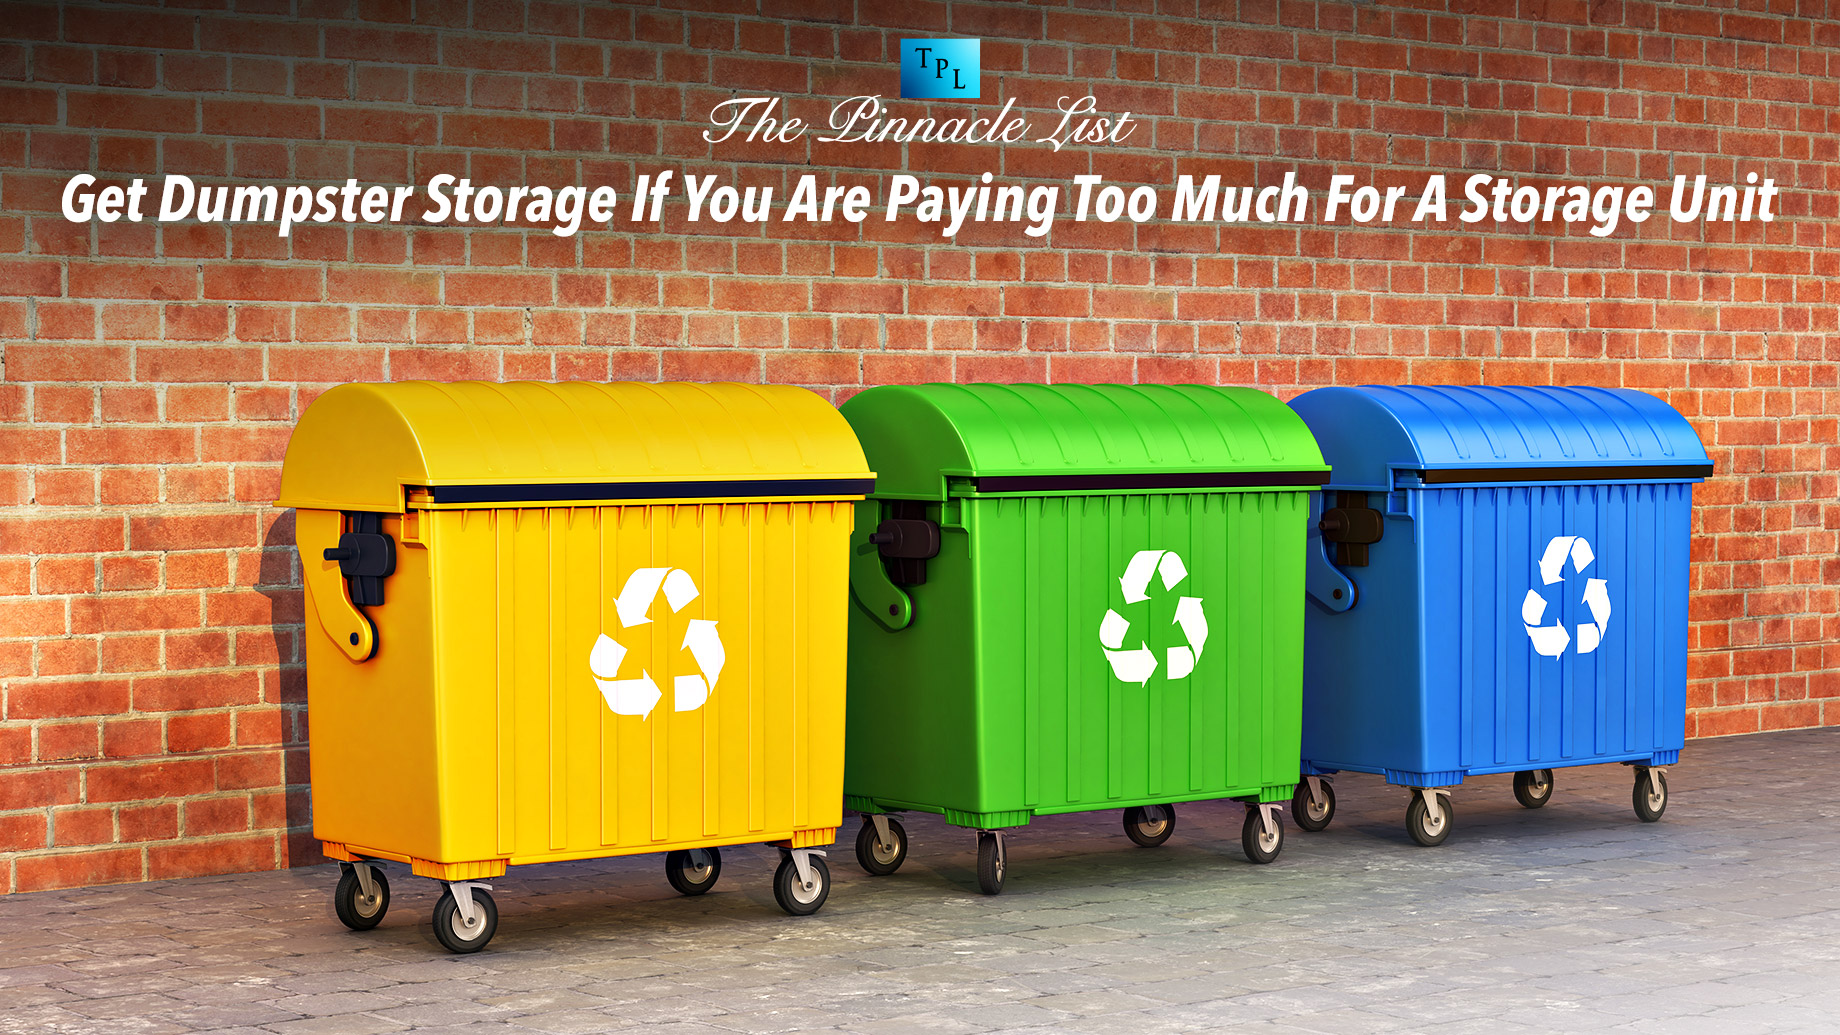 Get Dumpster Storage If You Are Paying Too Much For A Storage Unit